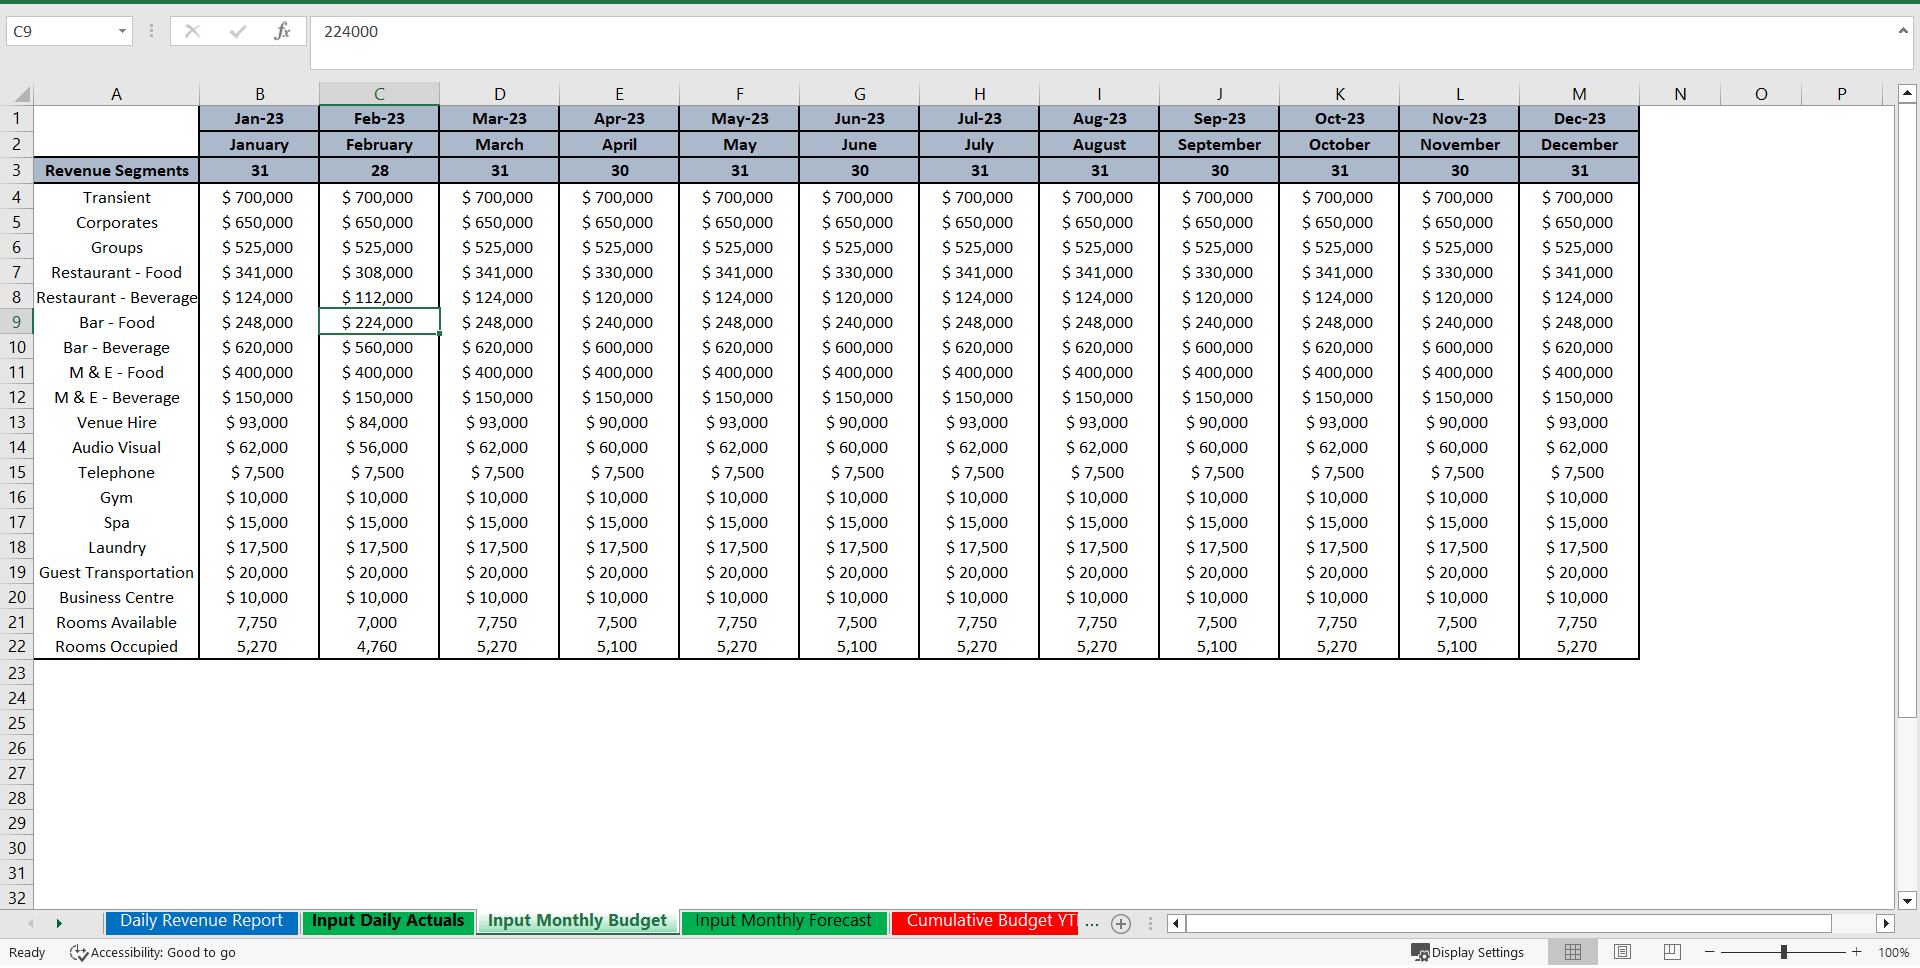 Hotel Daily Revenue Report (Excel template (XLSX)) Preview Image